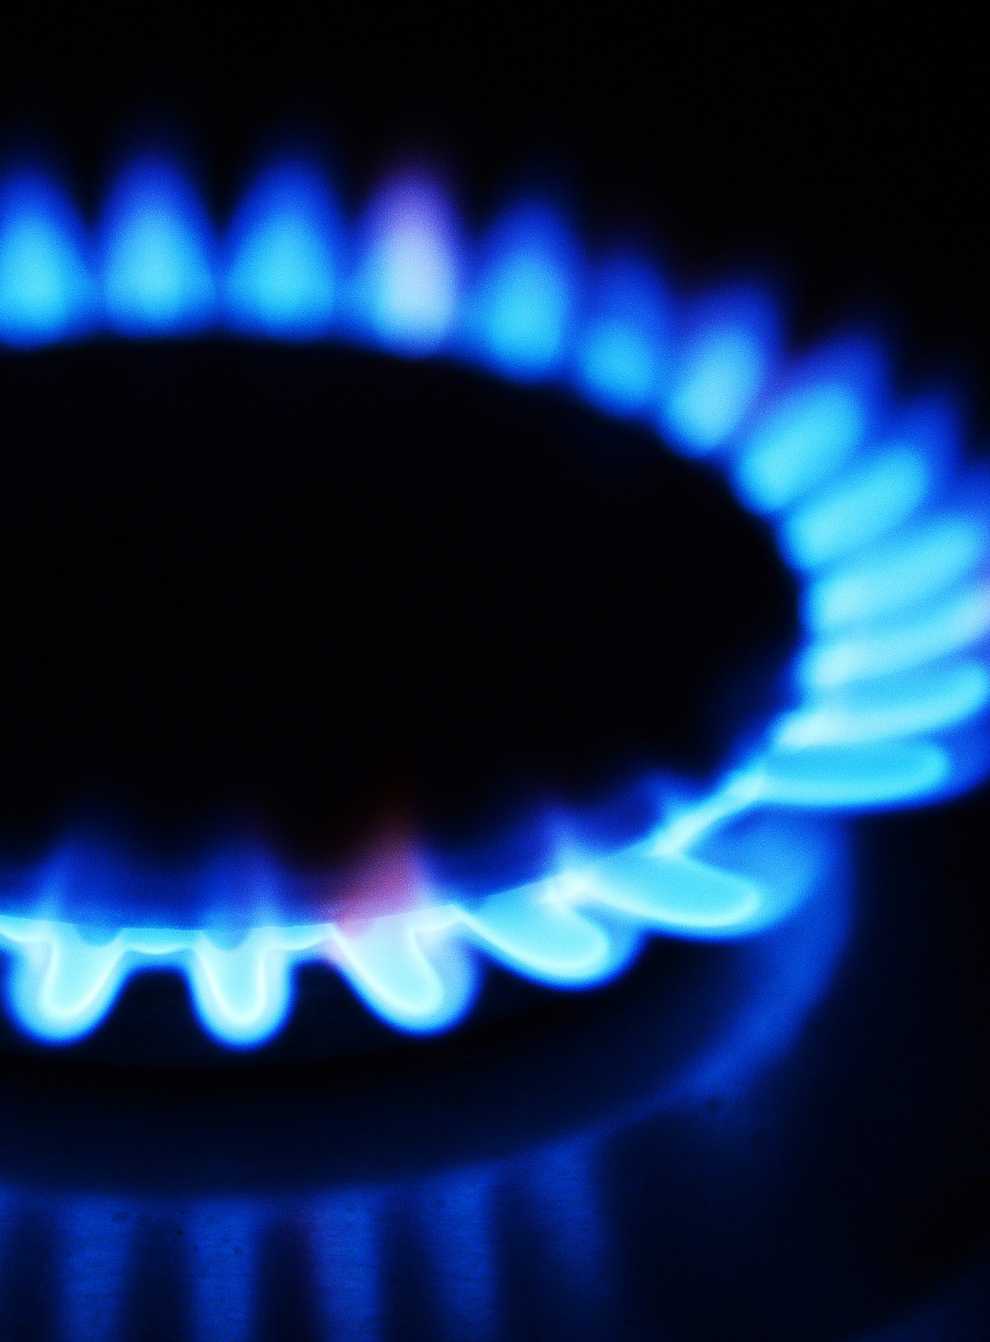 Energy bills are set to soar by 80% this winter without Government help.(John Stillwell/PA)